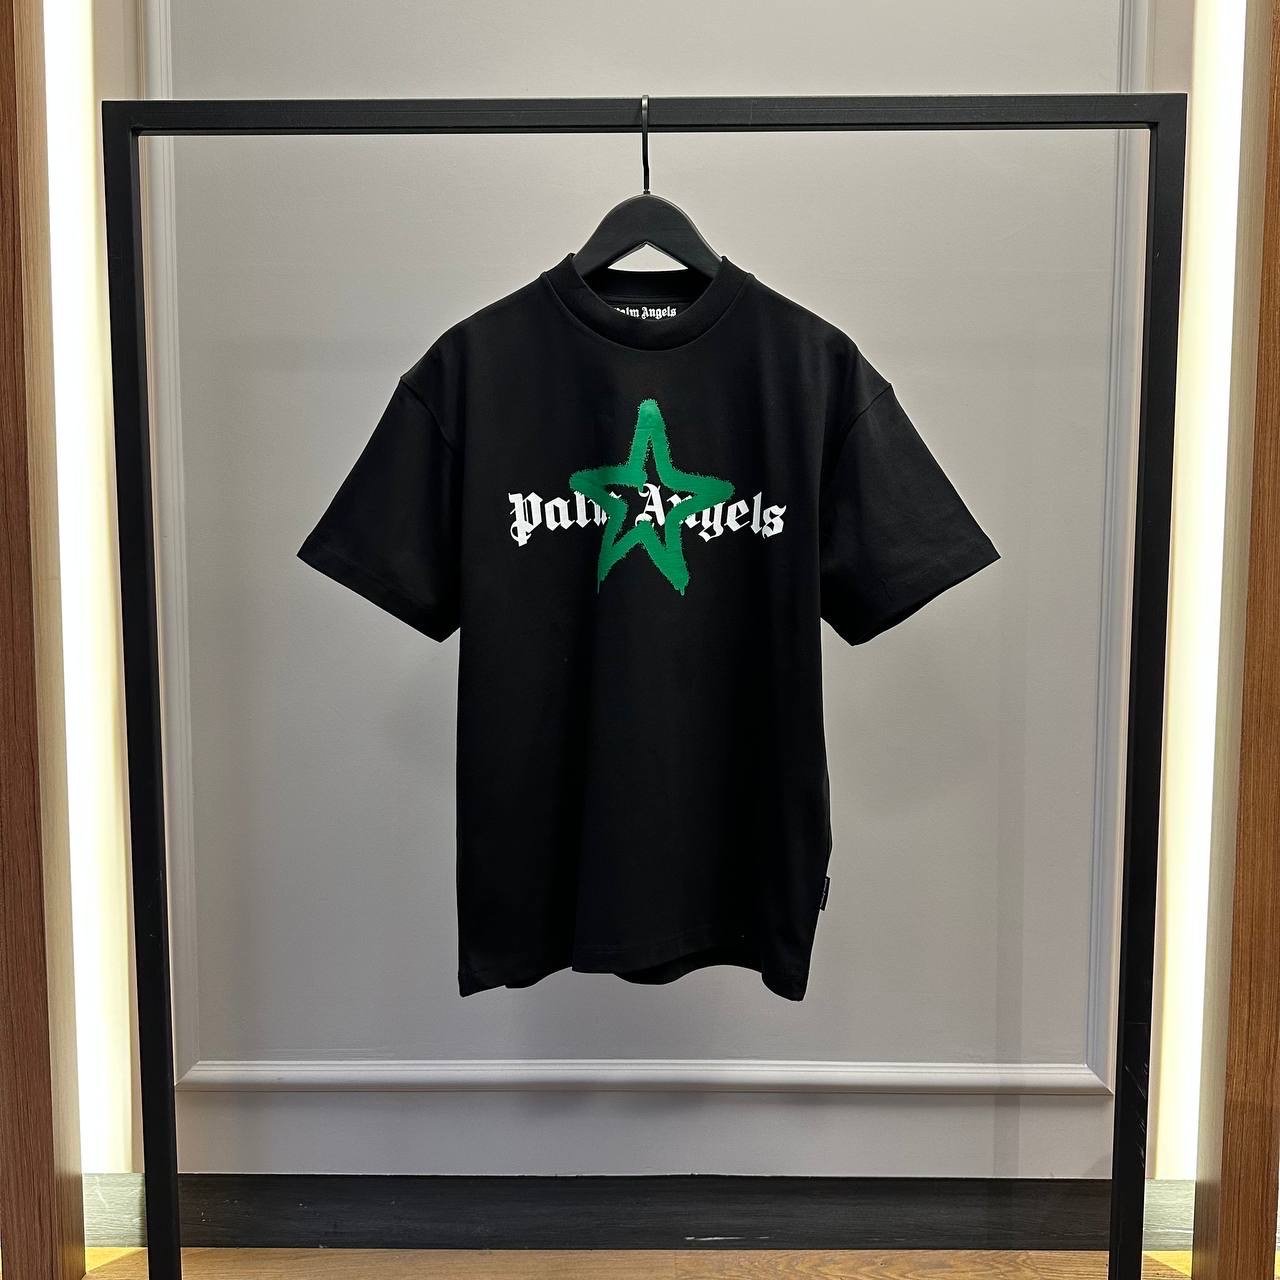 Star Sprayed Printed Cotton T Shirt in Black - Palm Angels